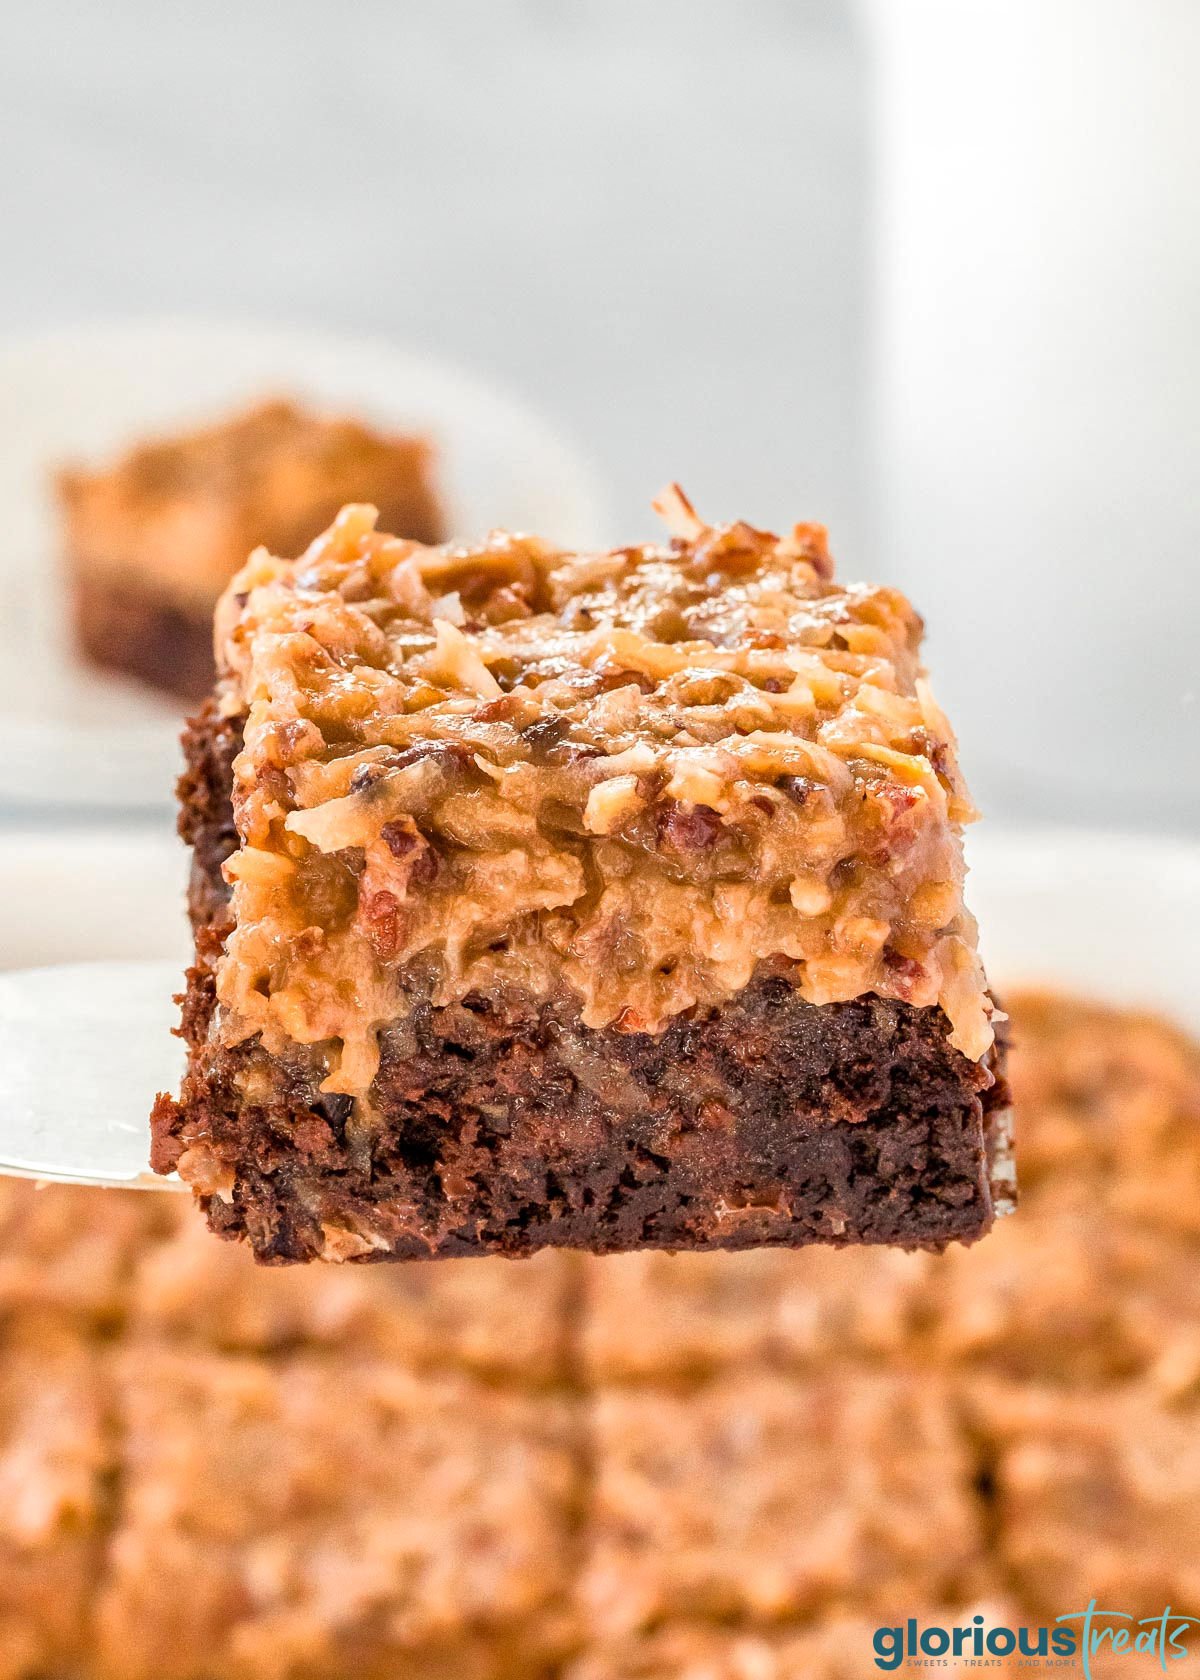 german chocolate brownie being held up with a server over the baking dish full of more brownies.